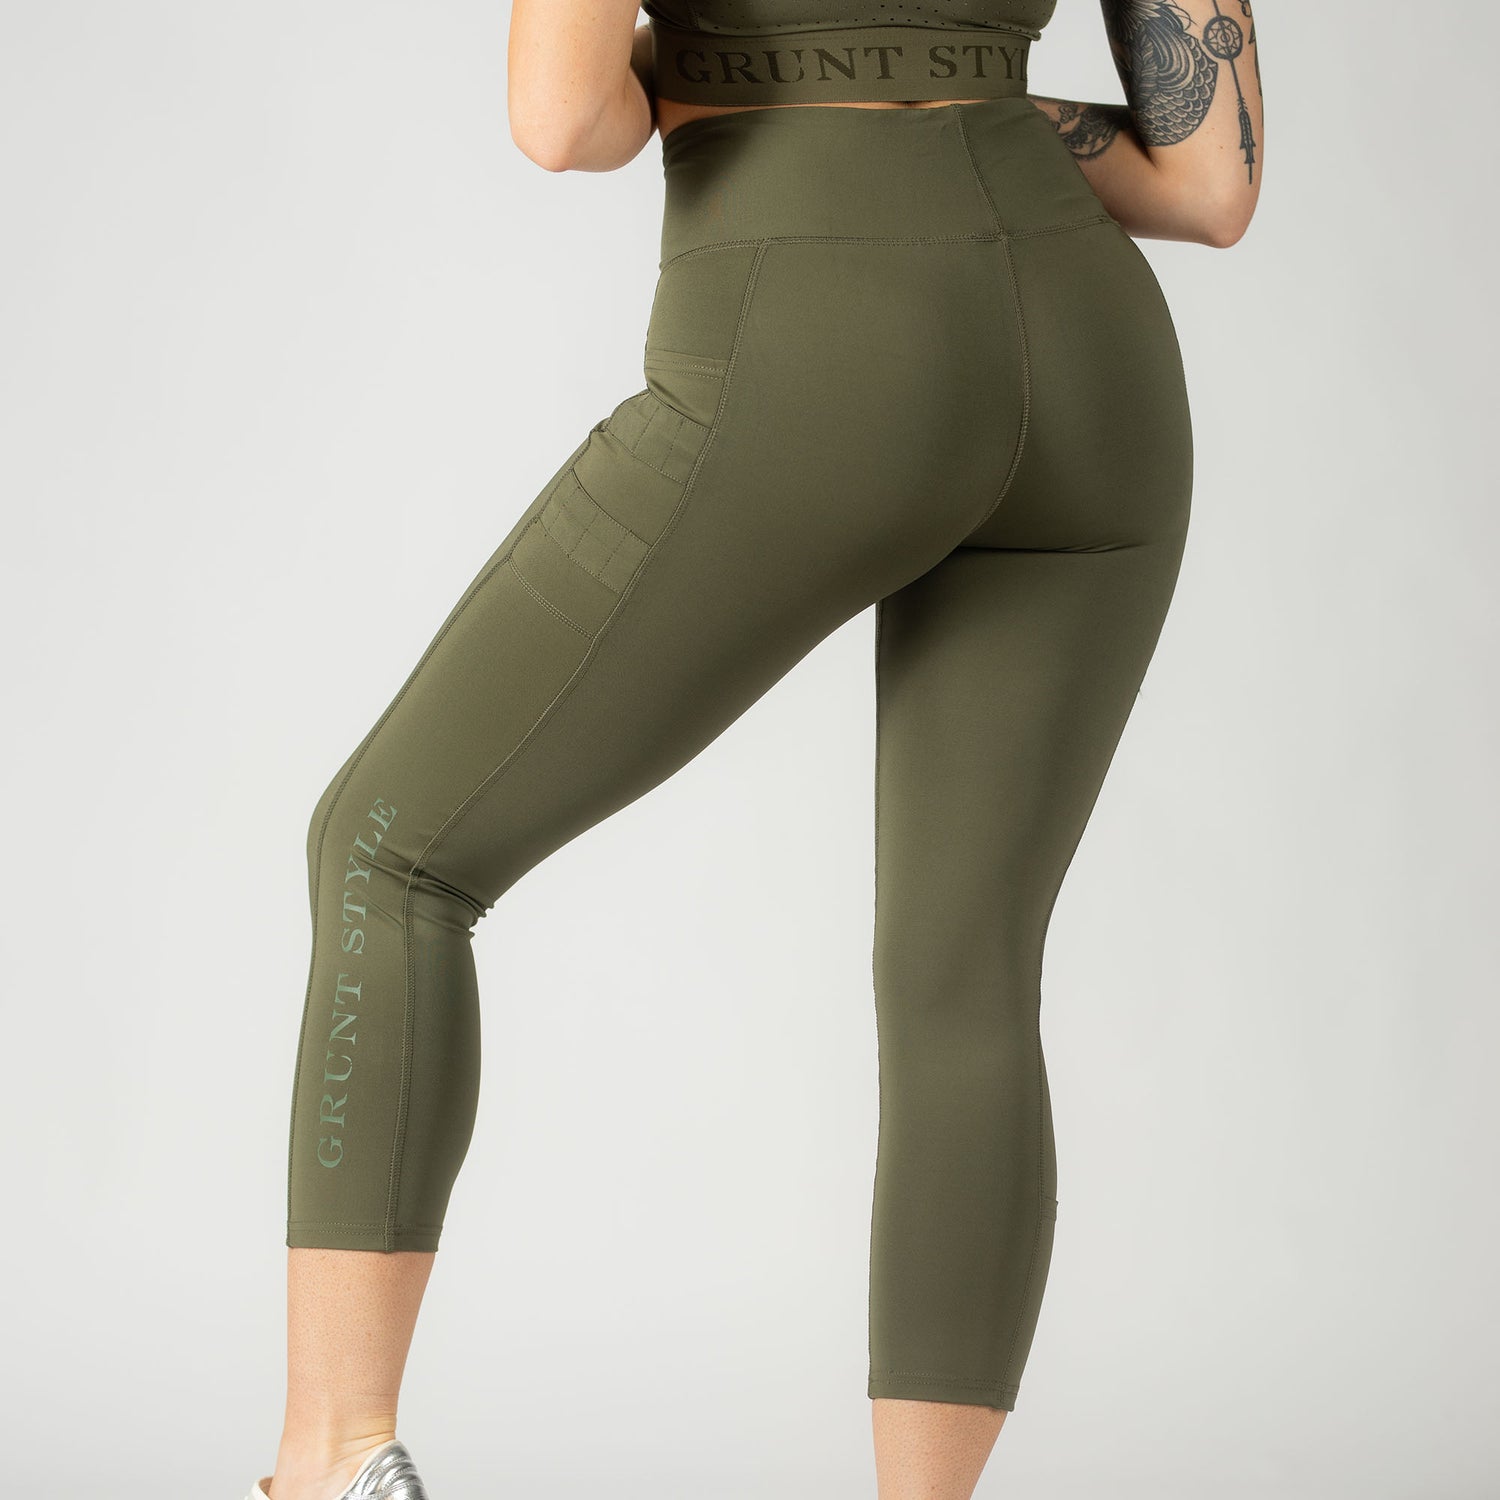 Gym Leggings that are high waisted 